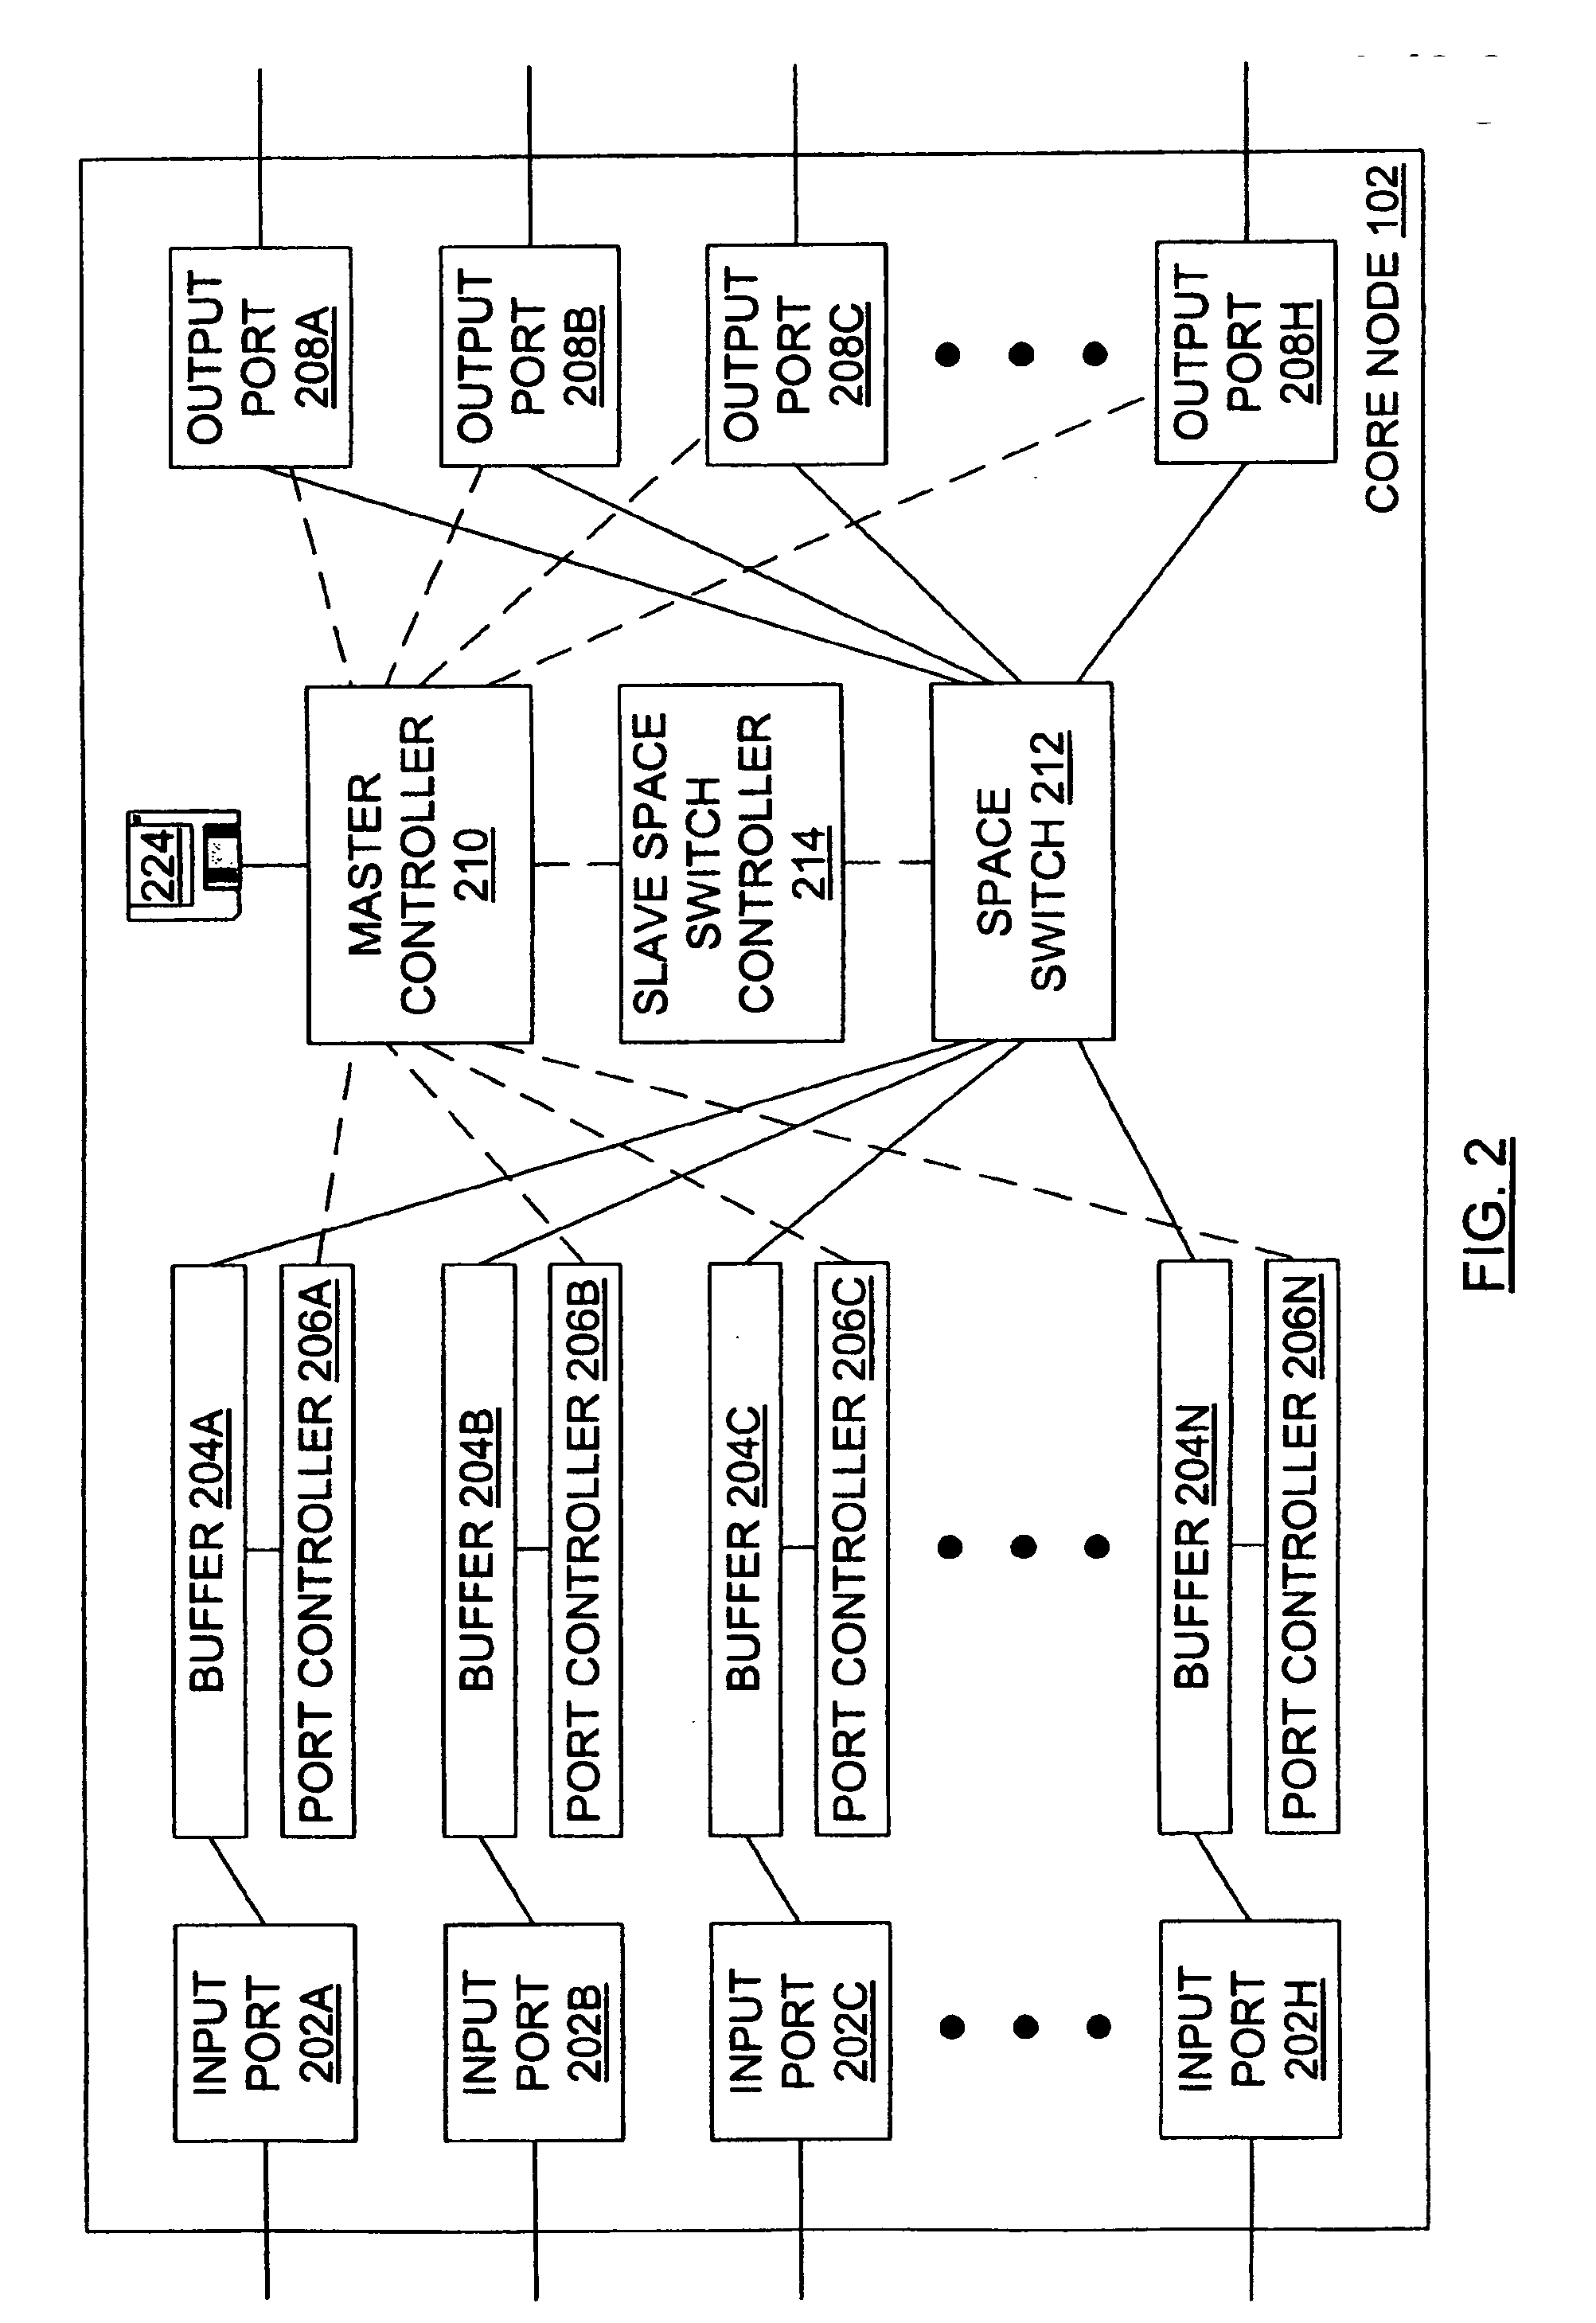 Burst switching in a high capacity network